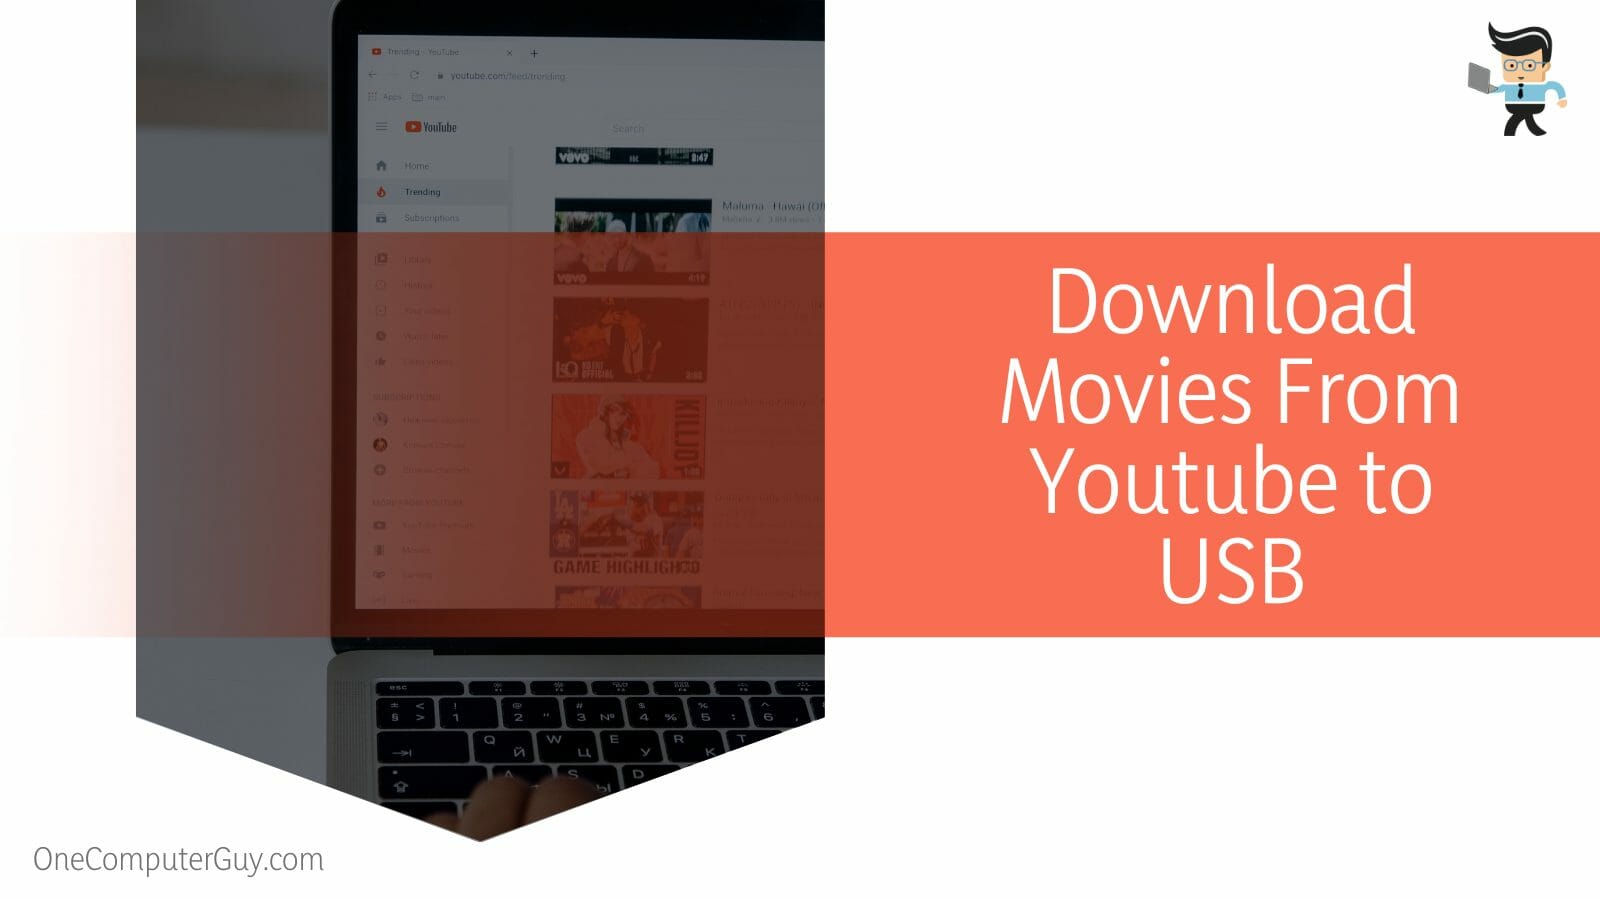 Download Movies From Youtube to USB